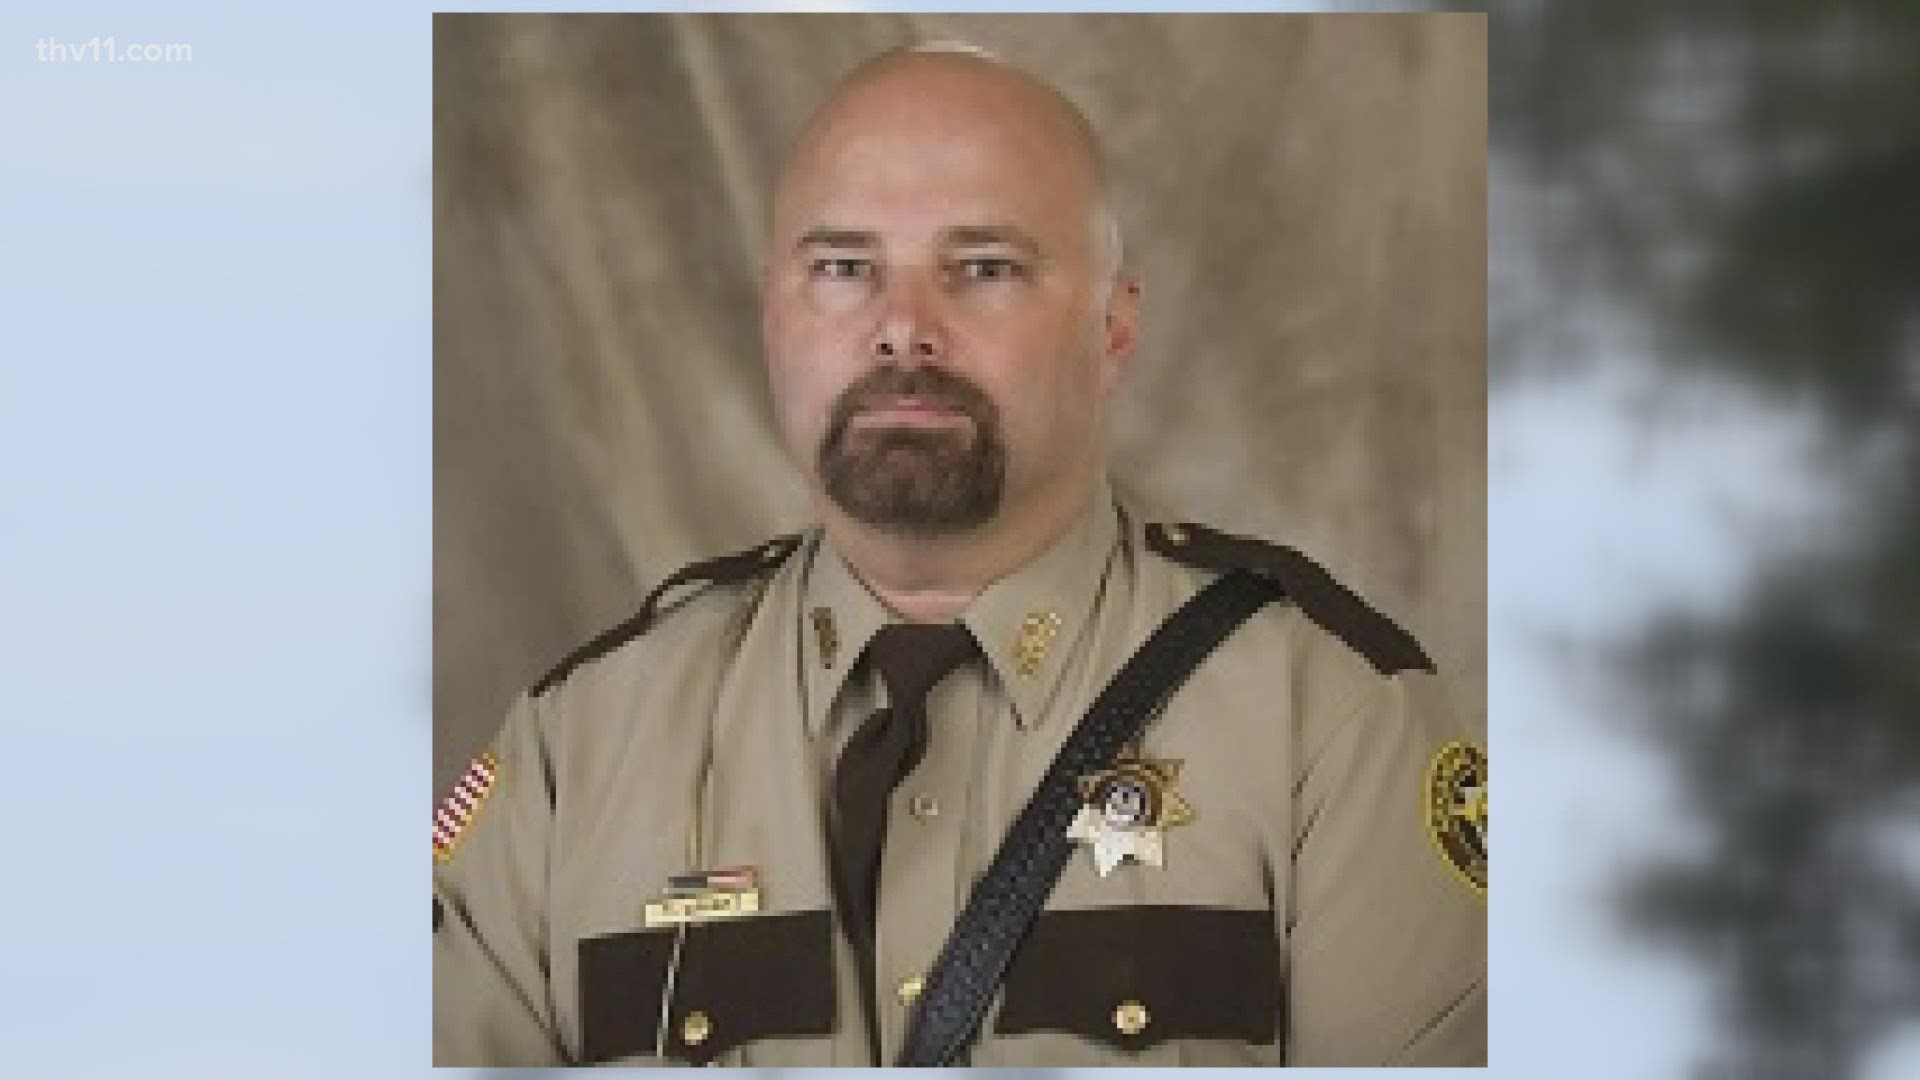 Swift action was taken in Arkansas County after an audio tape started going around social media. Sheriff Todd Wright can be heard using racial slurs.